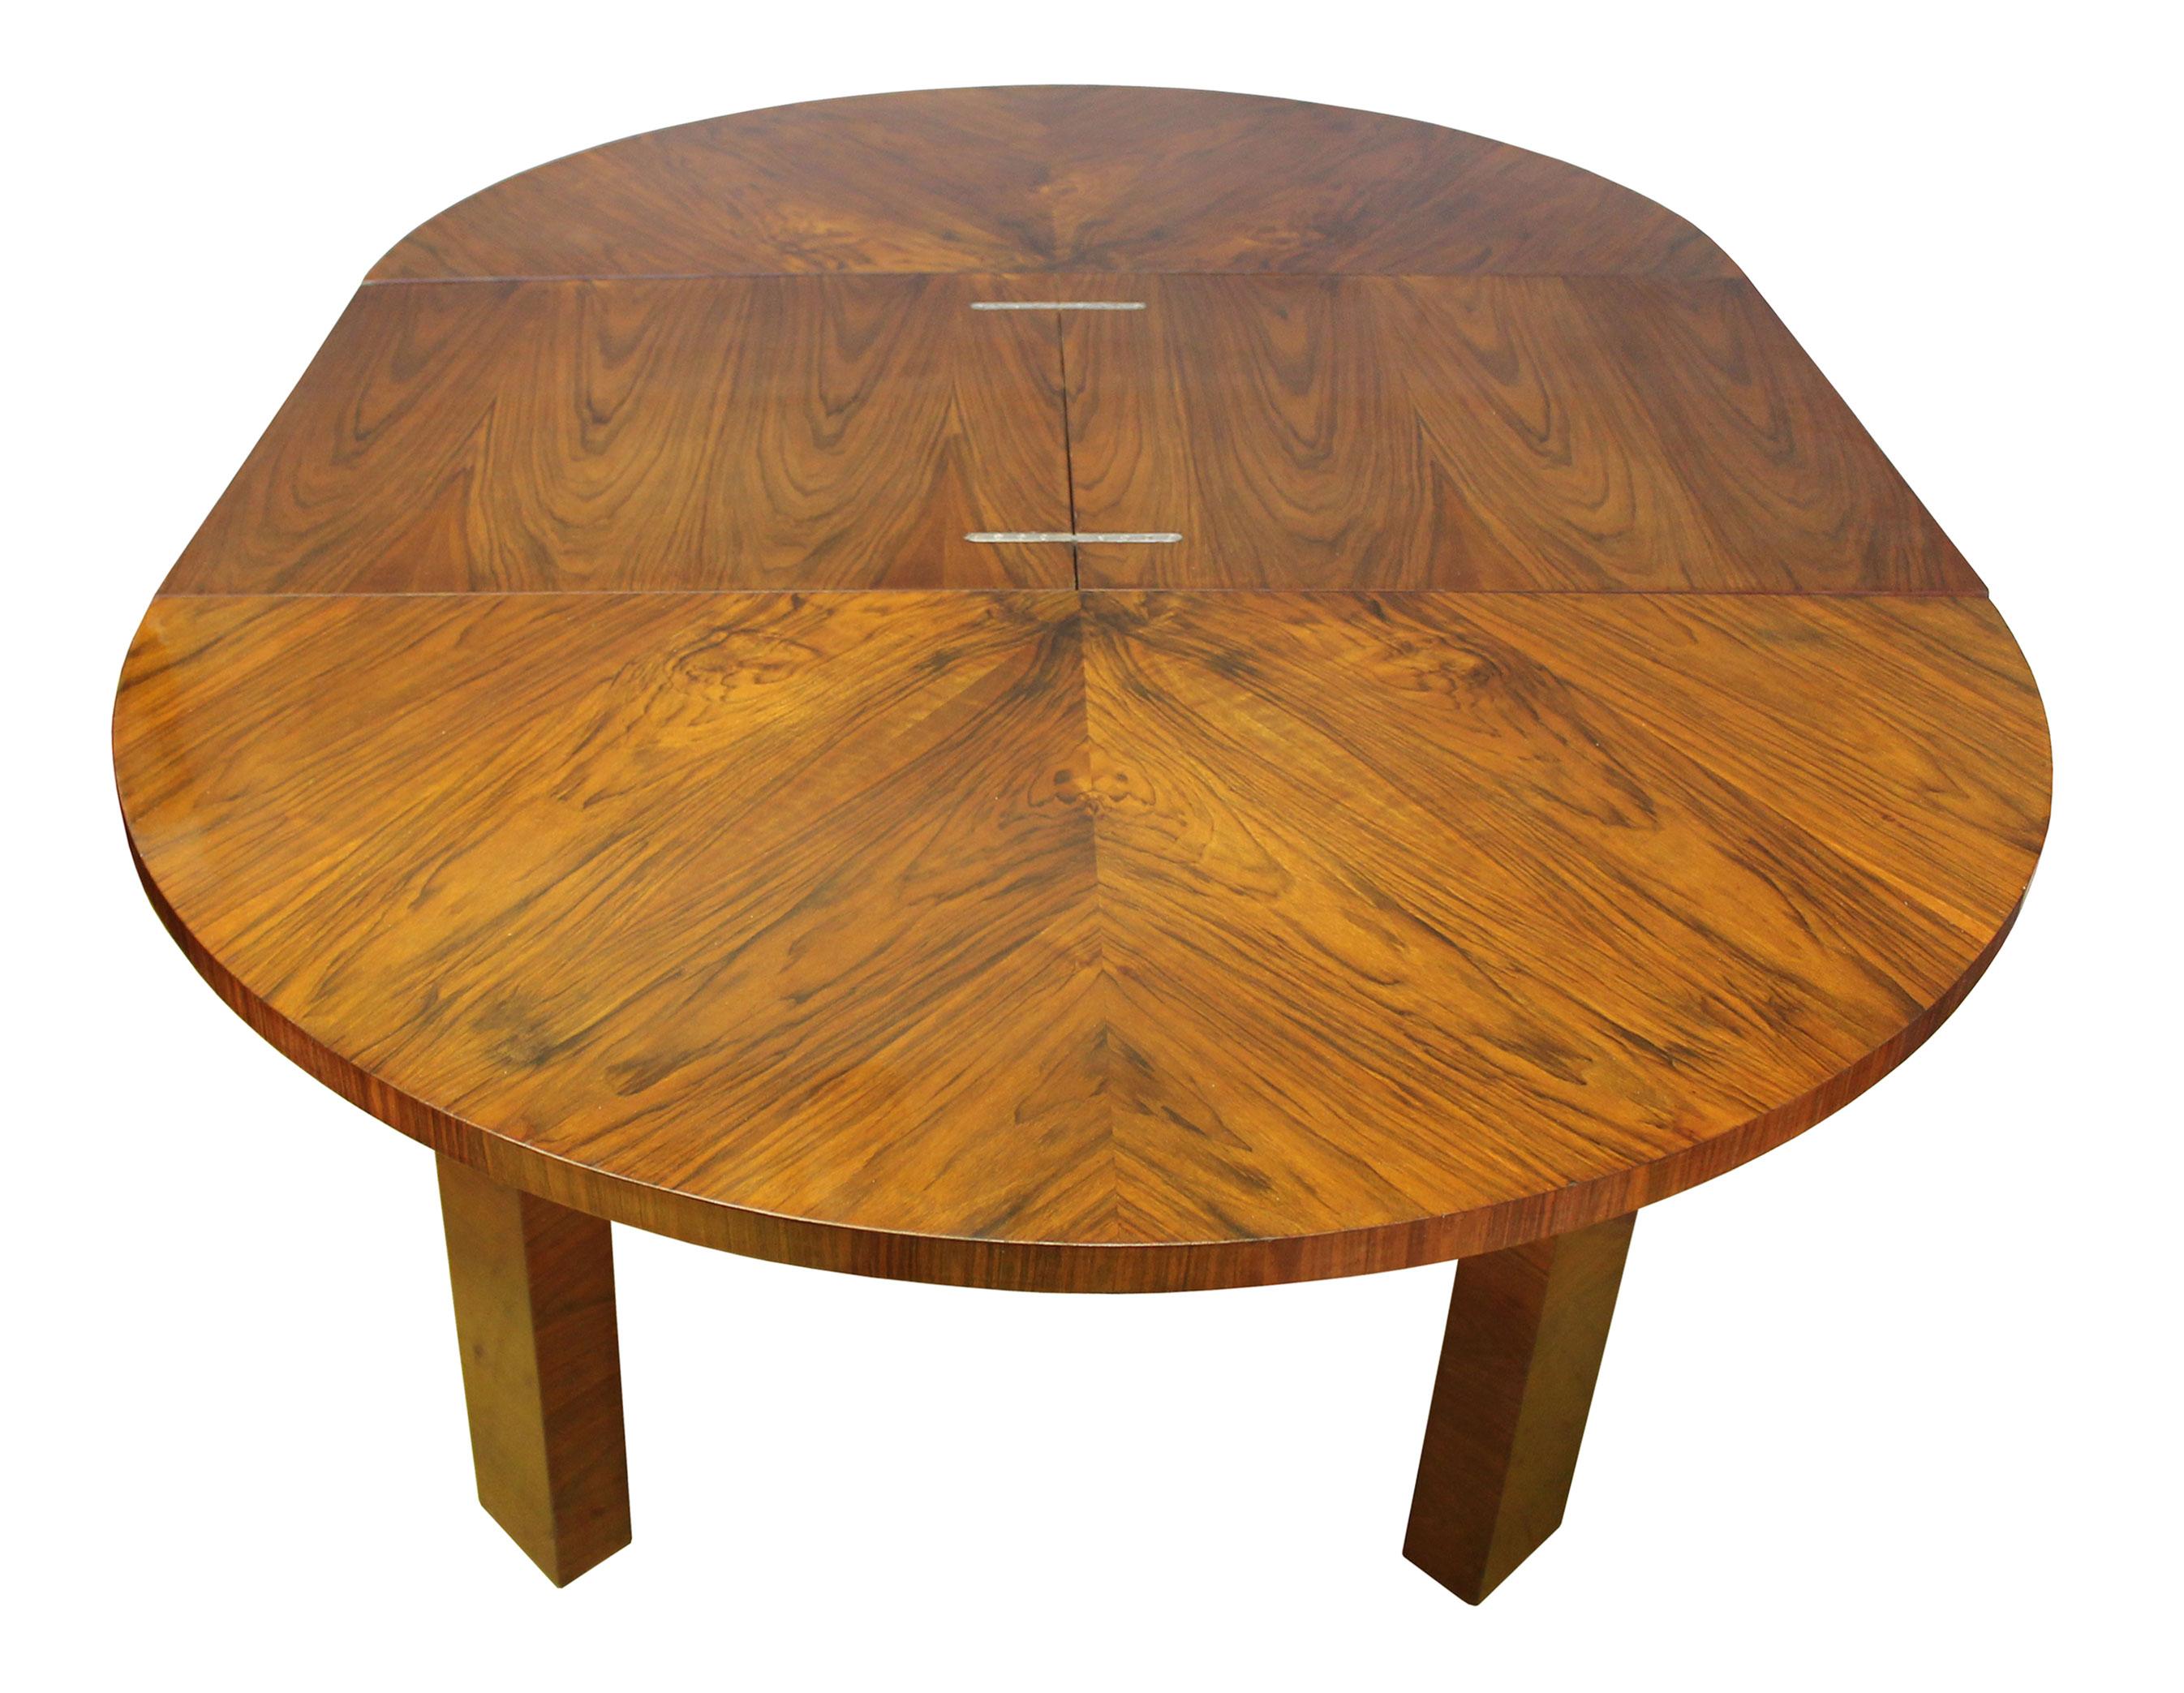 Lacquered 1930s Modernist Extendable Dining Table For Sale